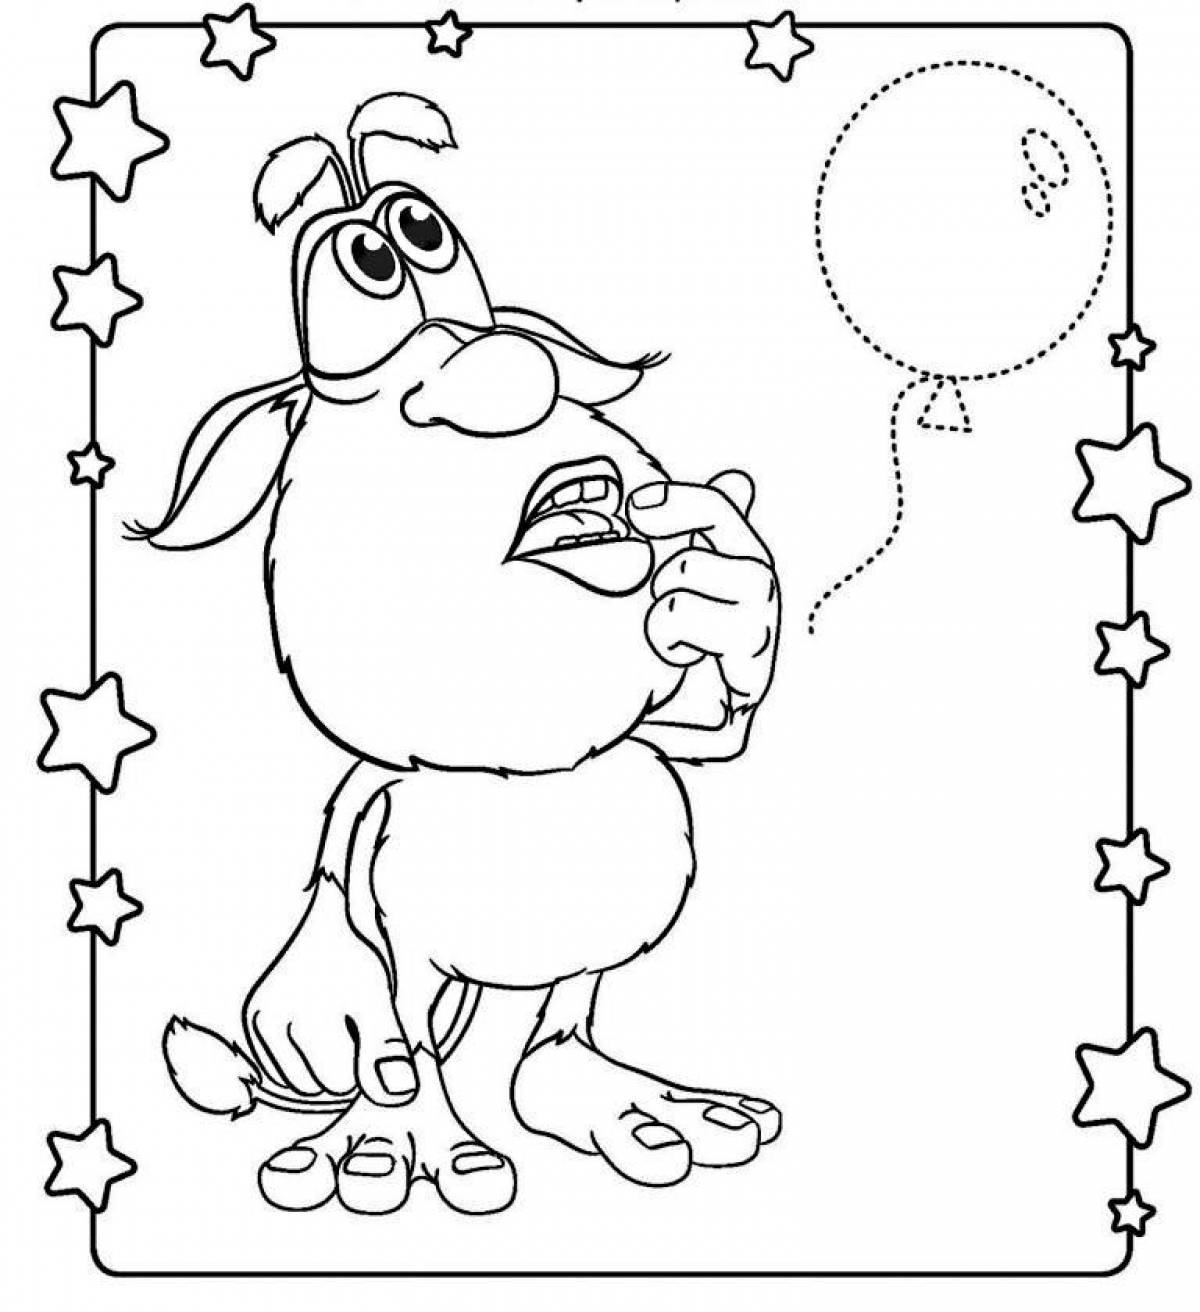 Blessed booba coloring book for kids